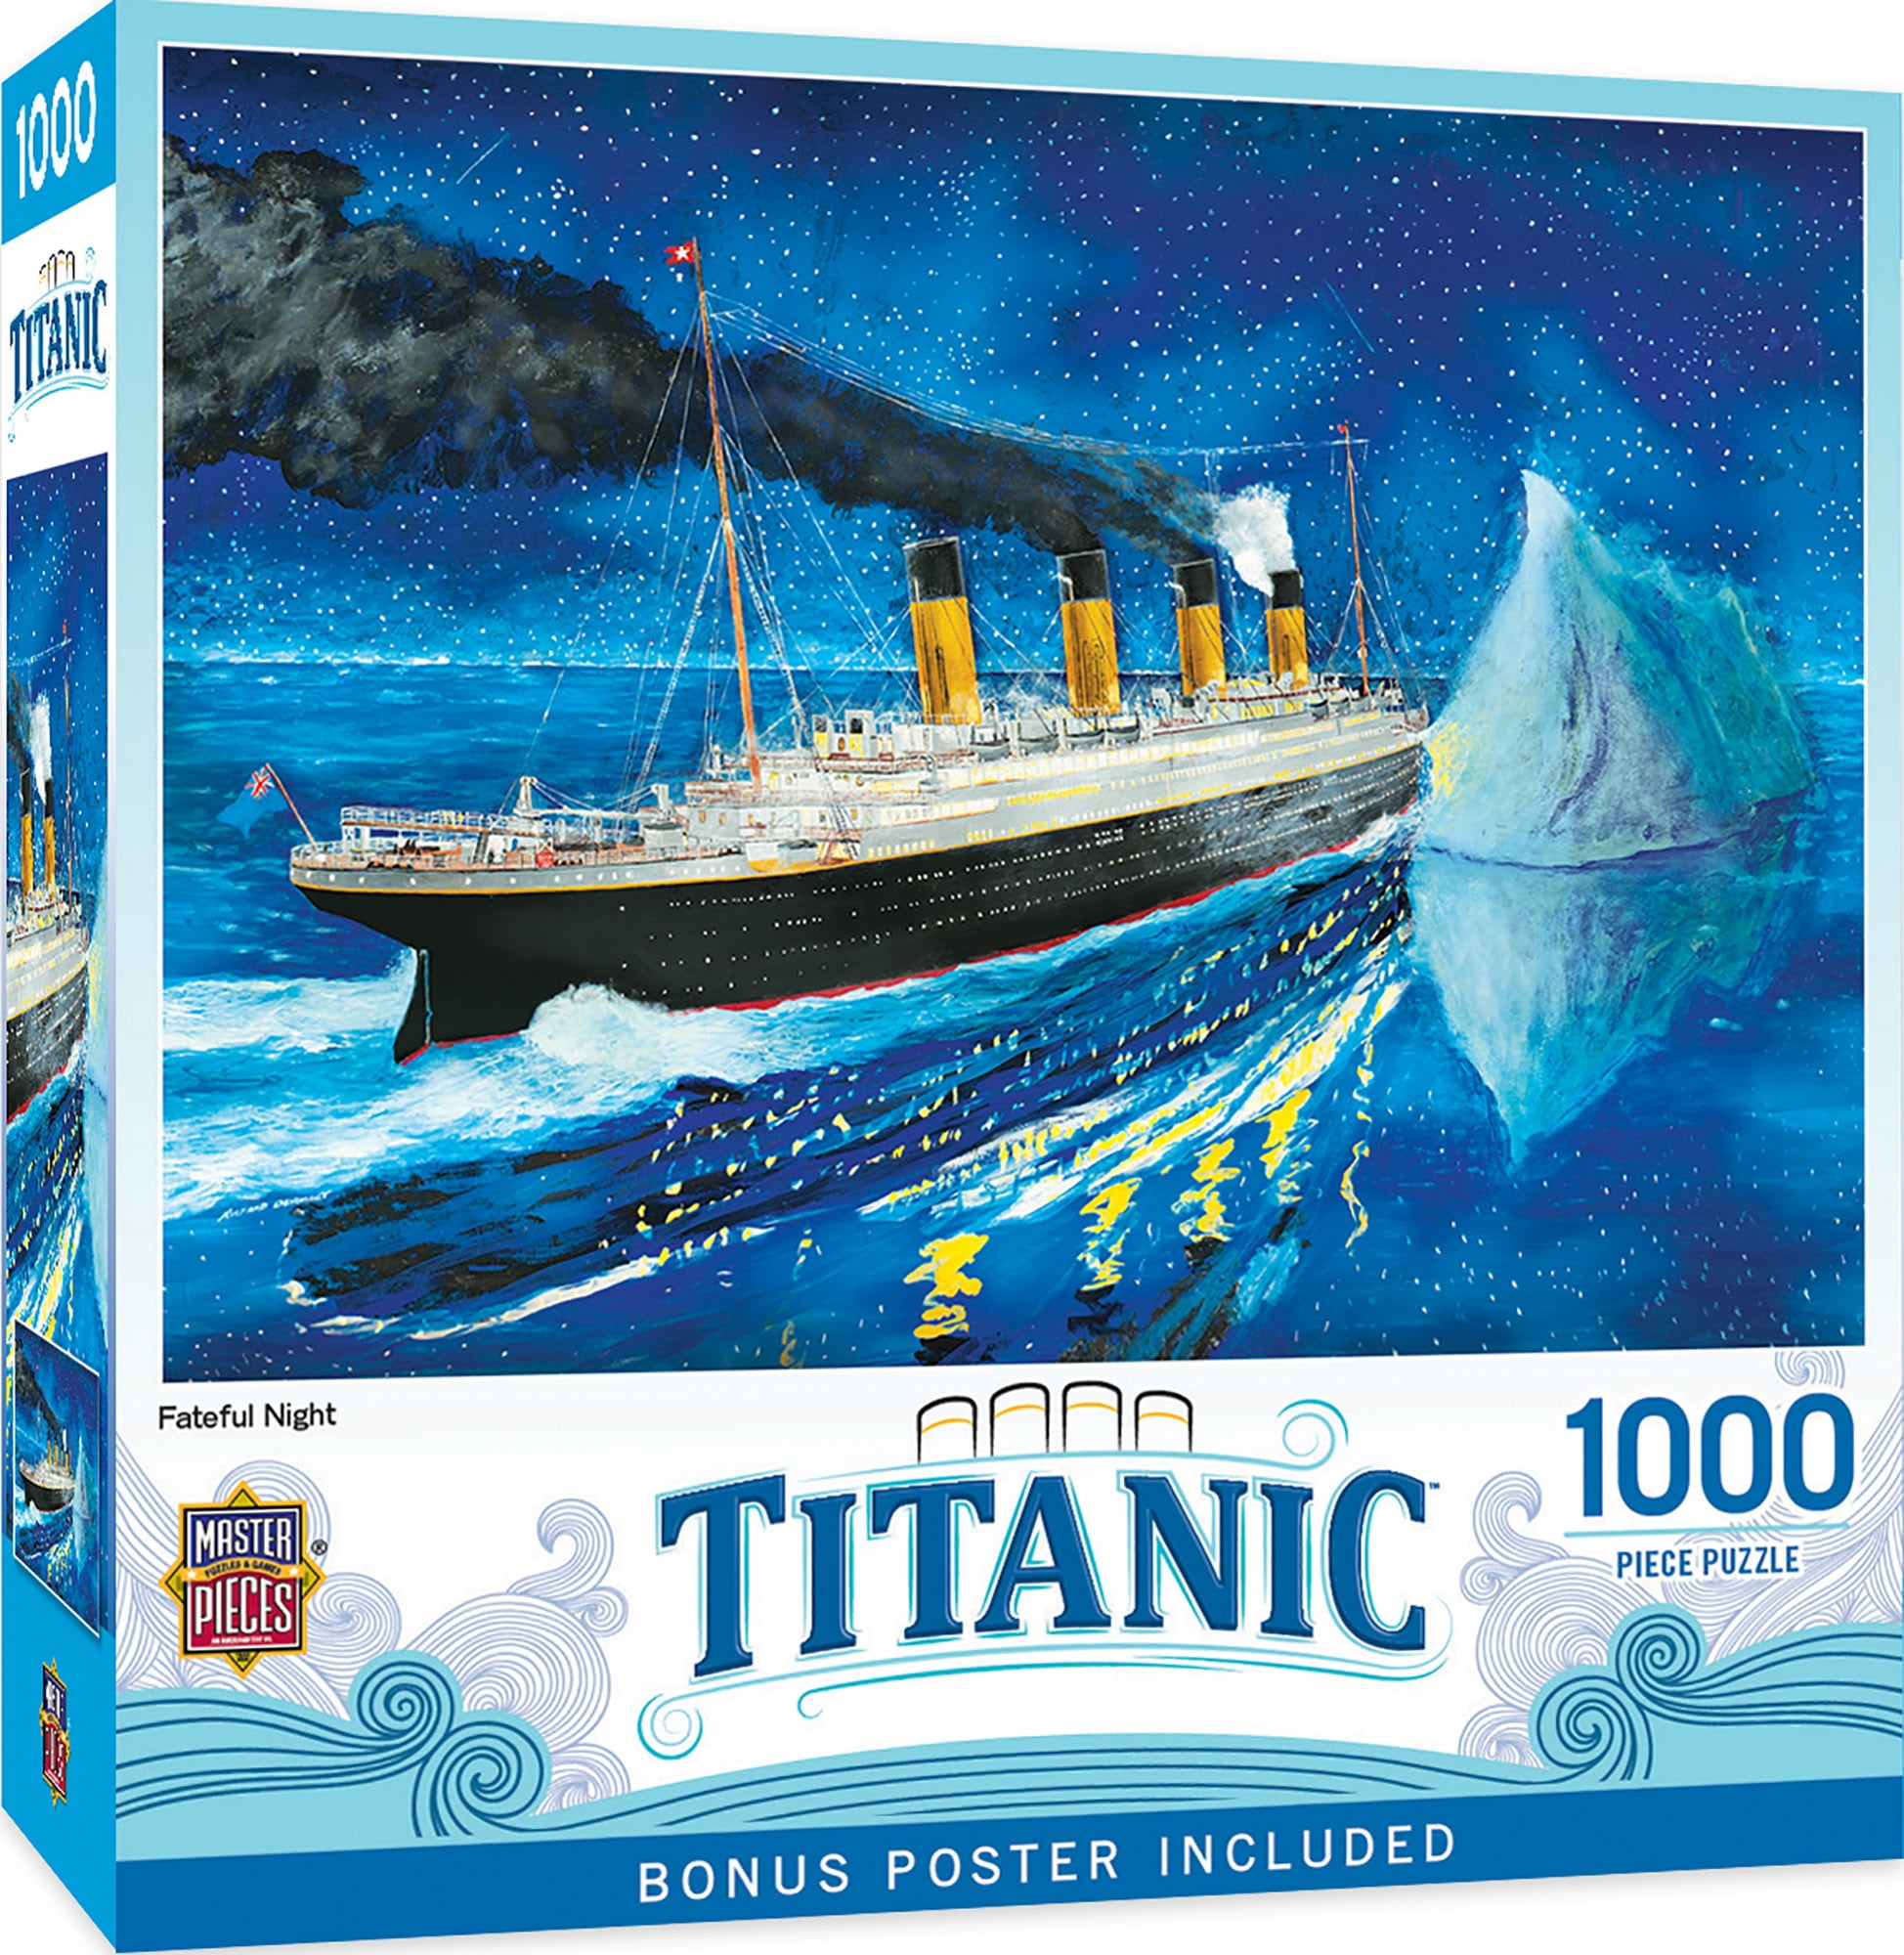 Blockbuster Titanic Movie Poster 500 Piece Puzzle-Cardinal New 11 X 14 In 